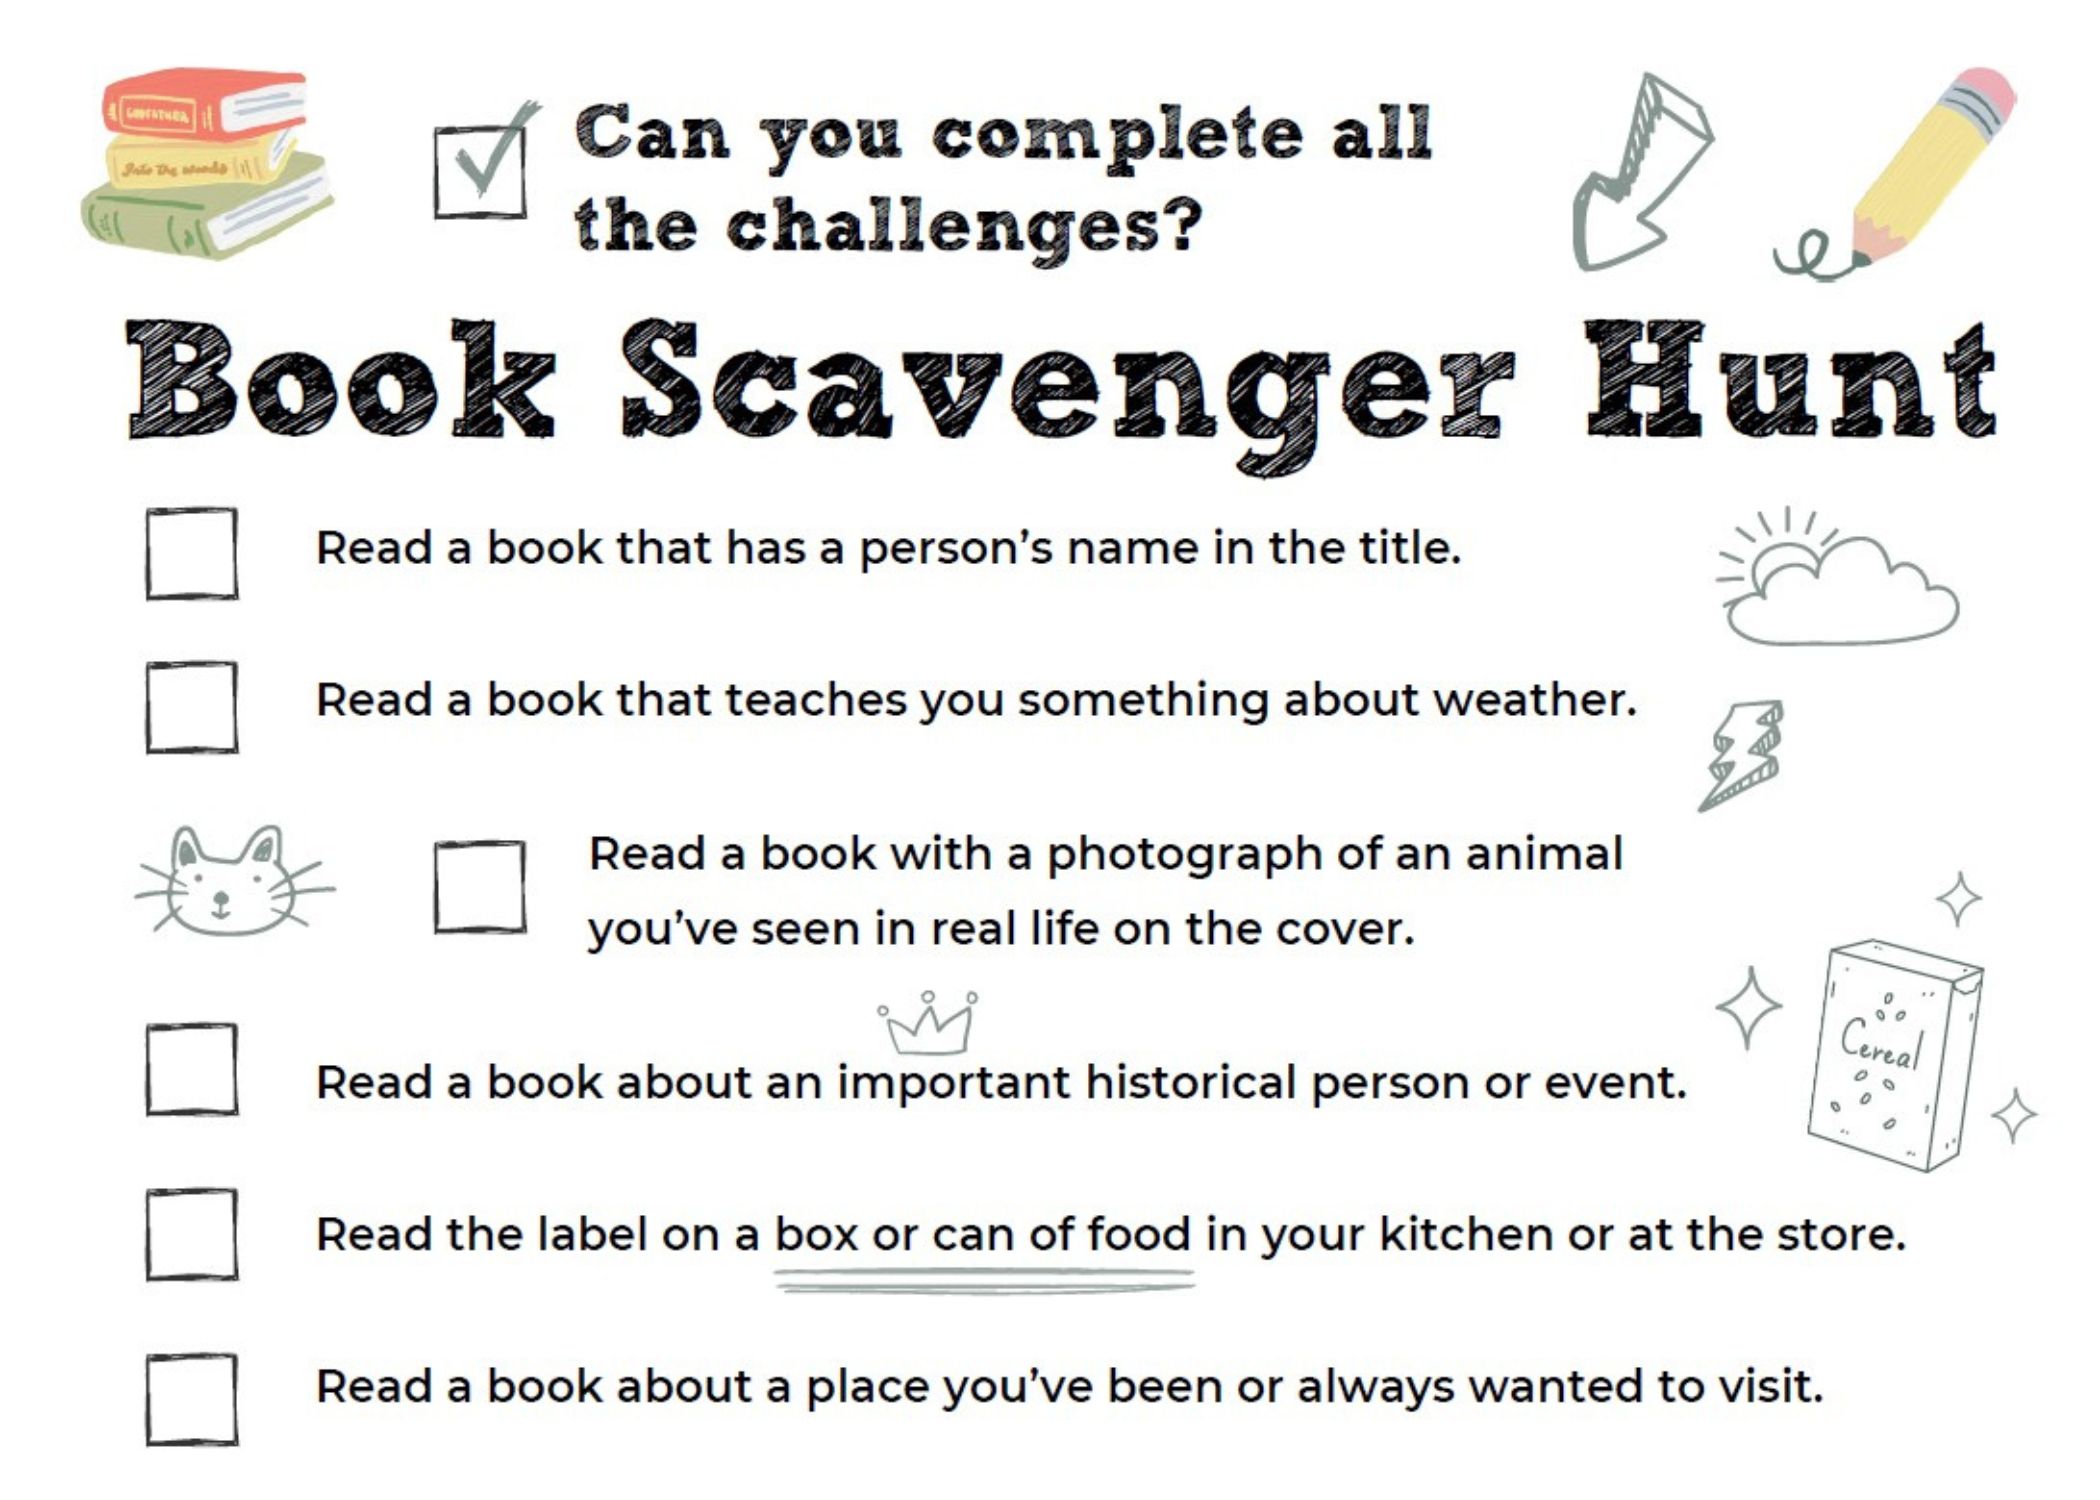 An image of the top half of the Book Scavenger Hunt activity sheet